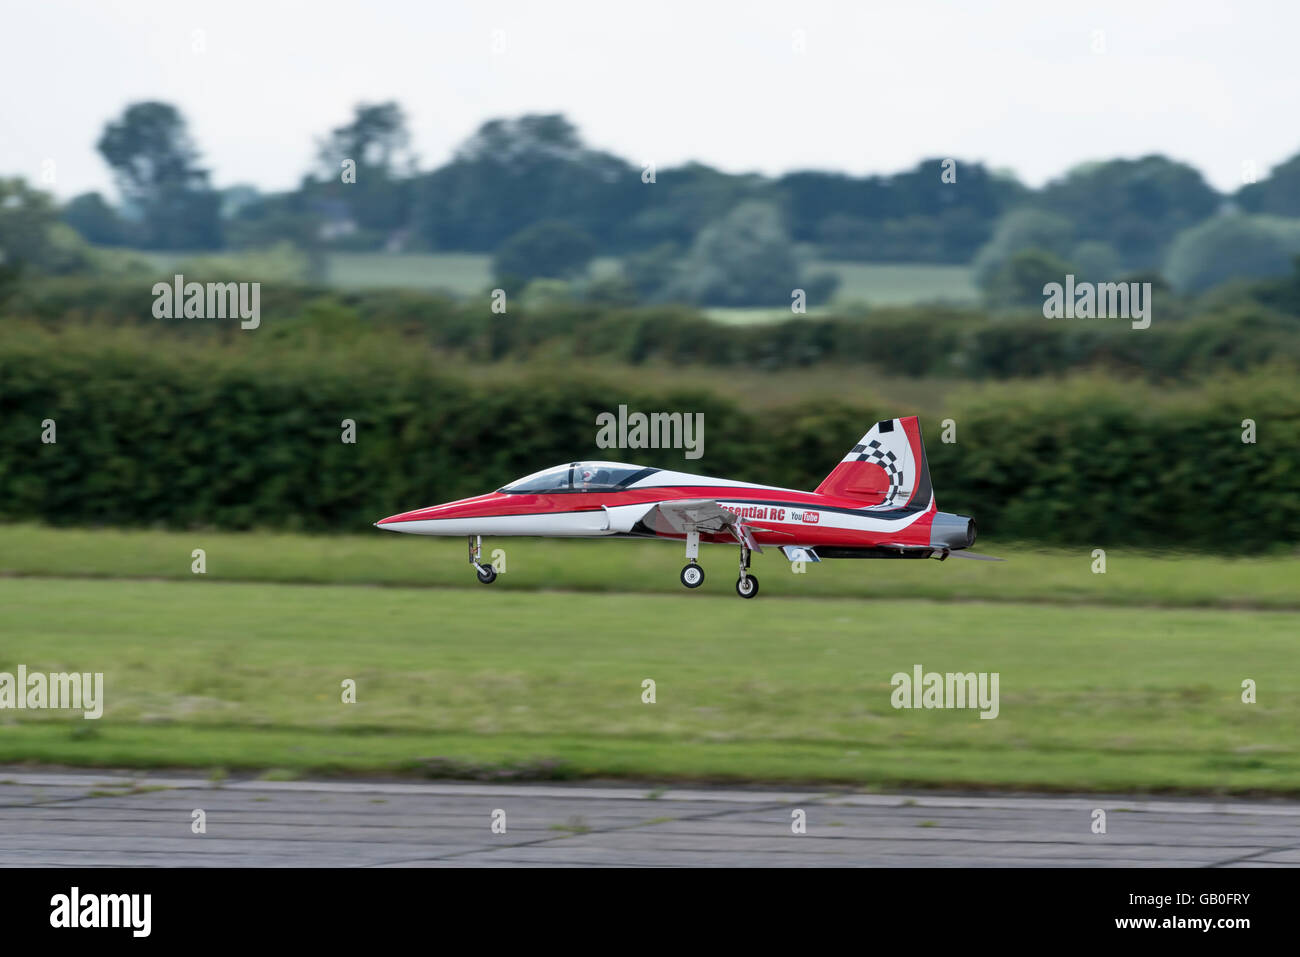 Model jet safely airborne at Wings 'n' Wheels North Weald airfield Epping Essex England Stock Photo